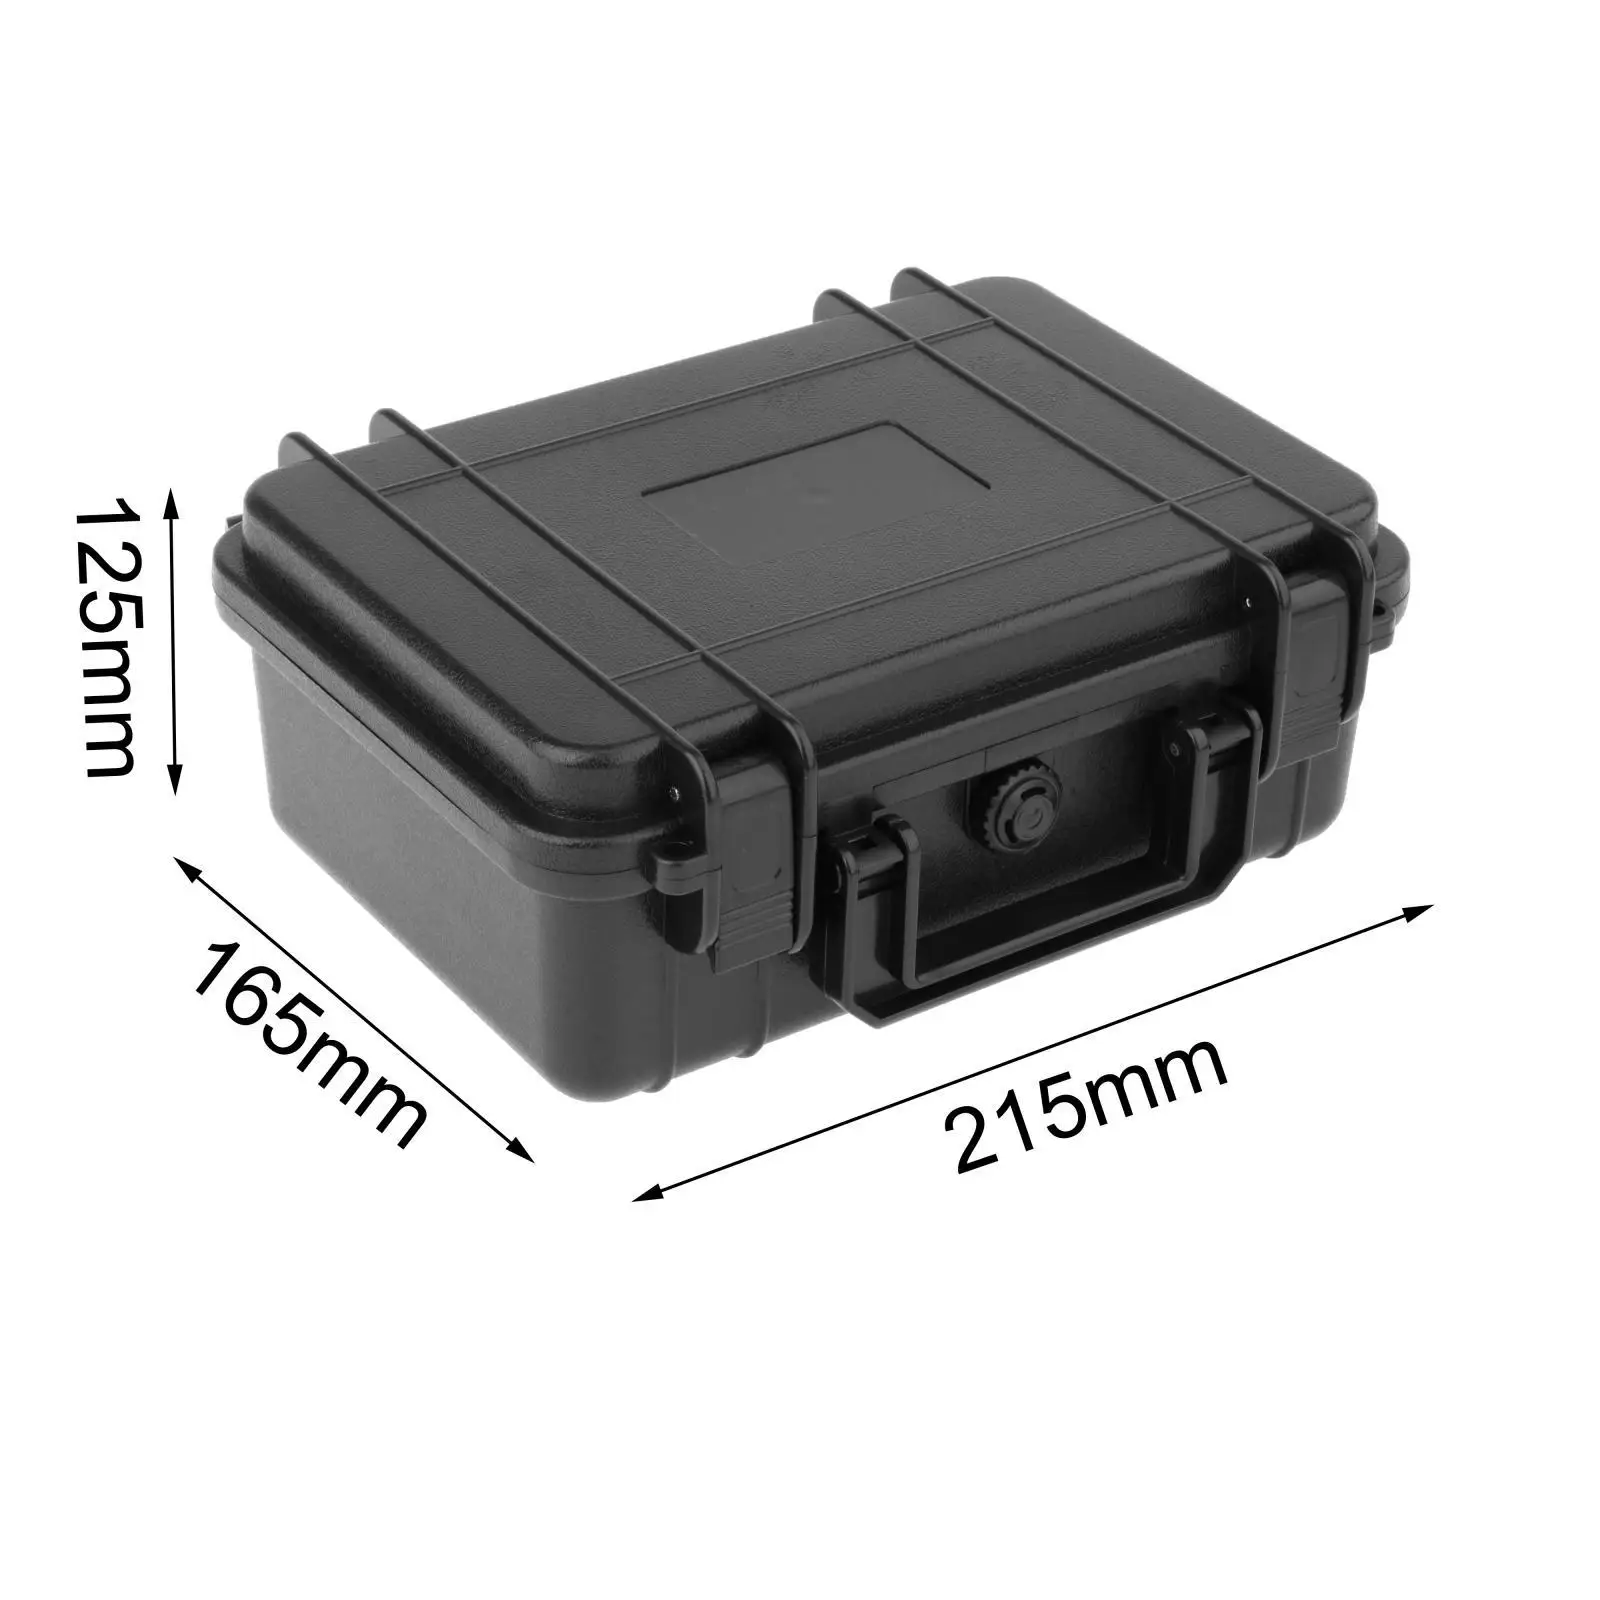 Multifunctional Tool Case Storage Container Carrying Case Tool Box Tool Organizer Pouch Shockproof for Tools Repair Tool